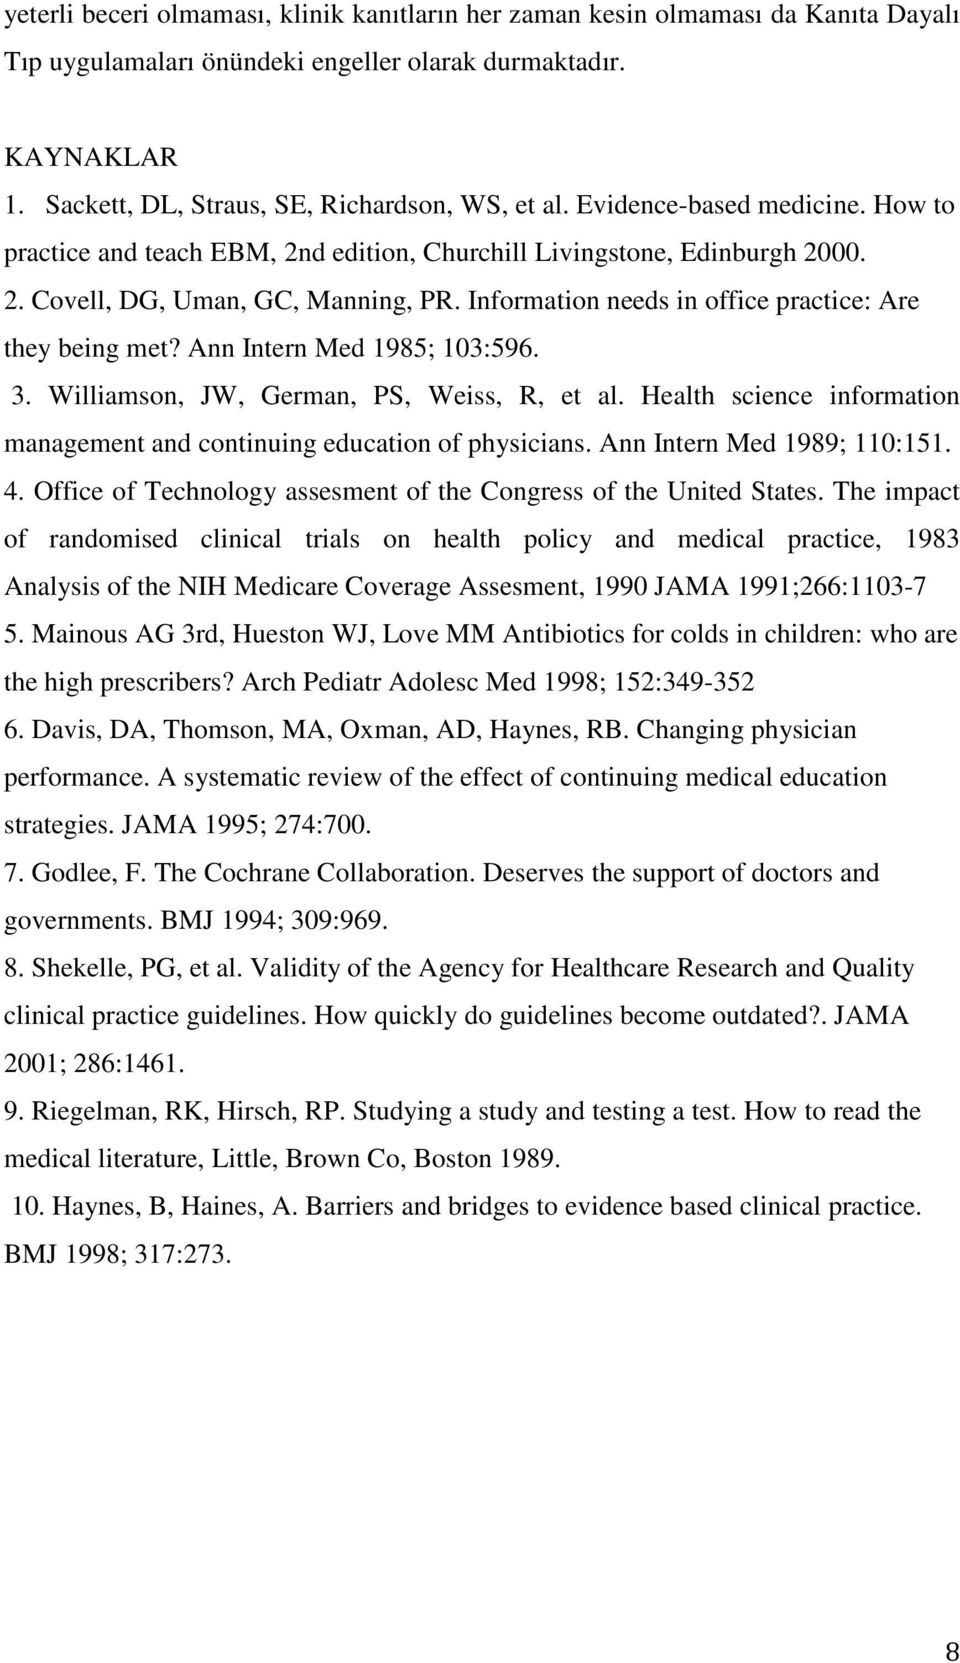 Information needs in office practice: Are they being met? Ann Intern Med 1985; 103:596. 3. Williamson, JW, German, PS, Weiss, R, et al.